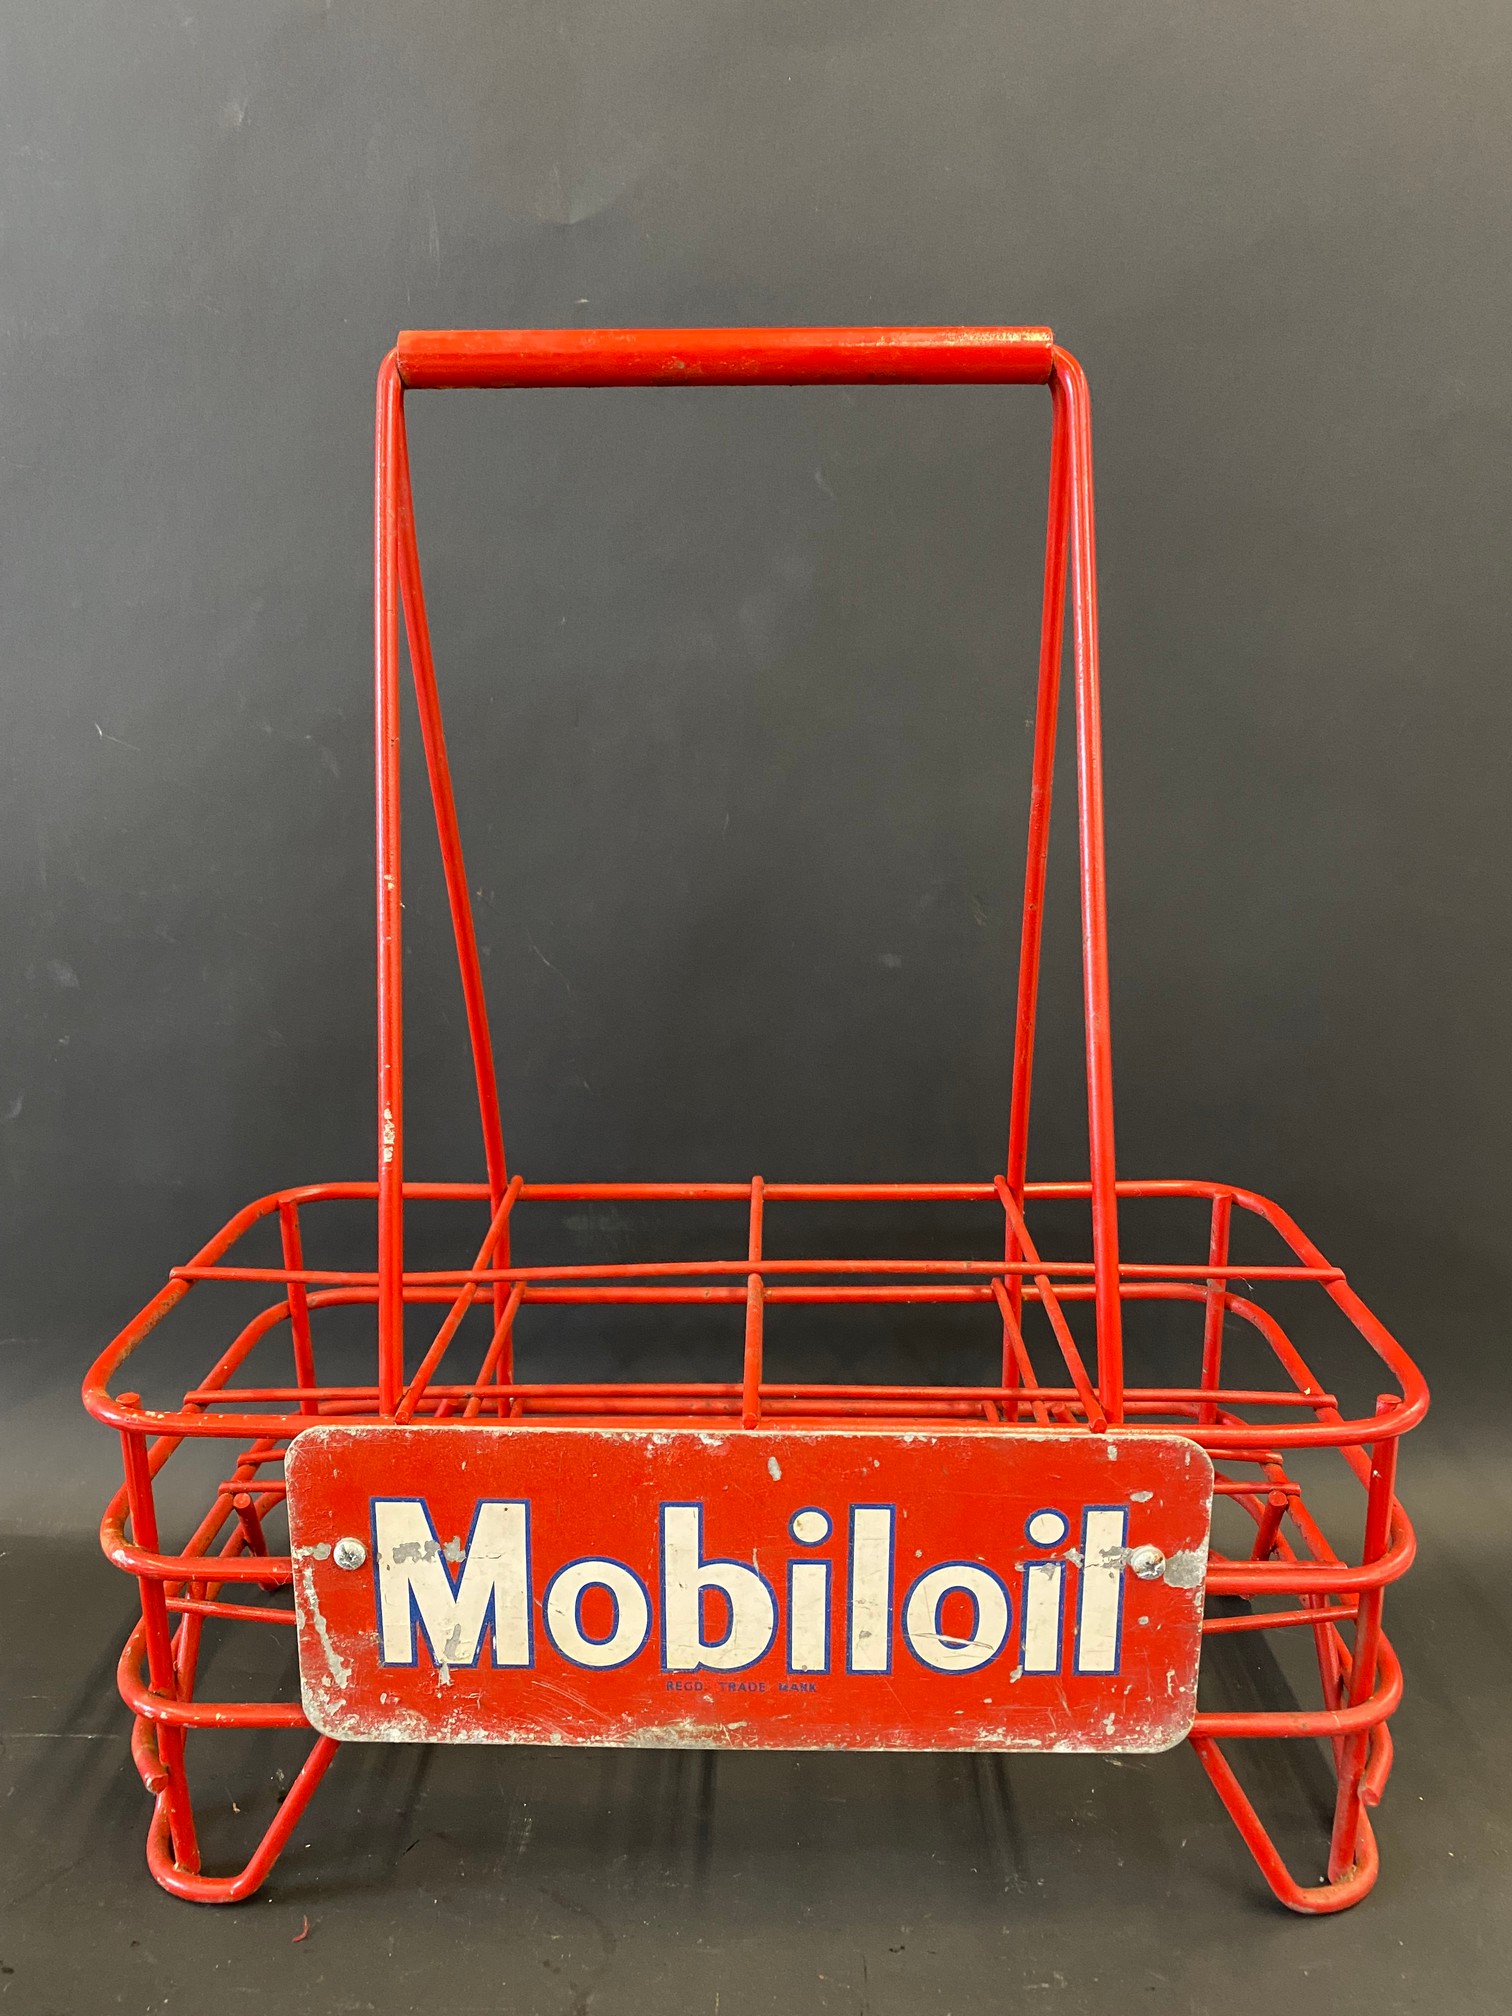 A Mobiloil eight-division oil bottle crate.